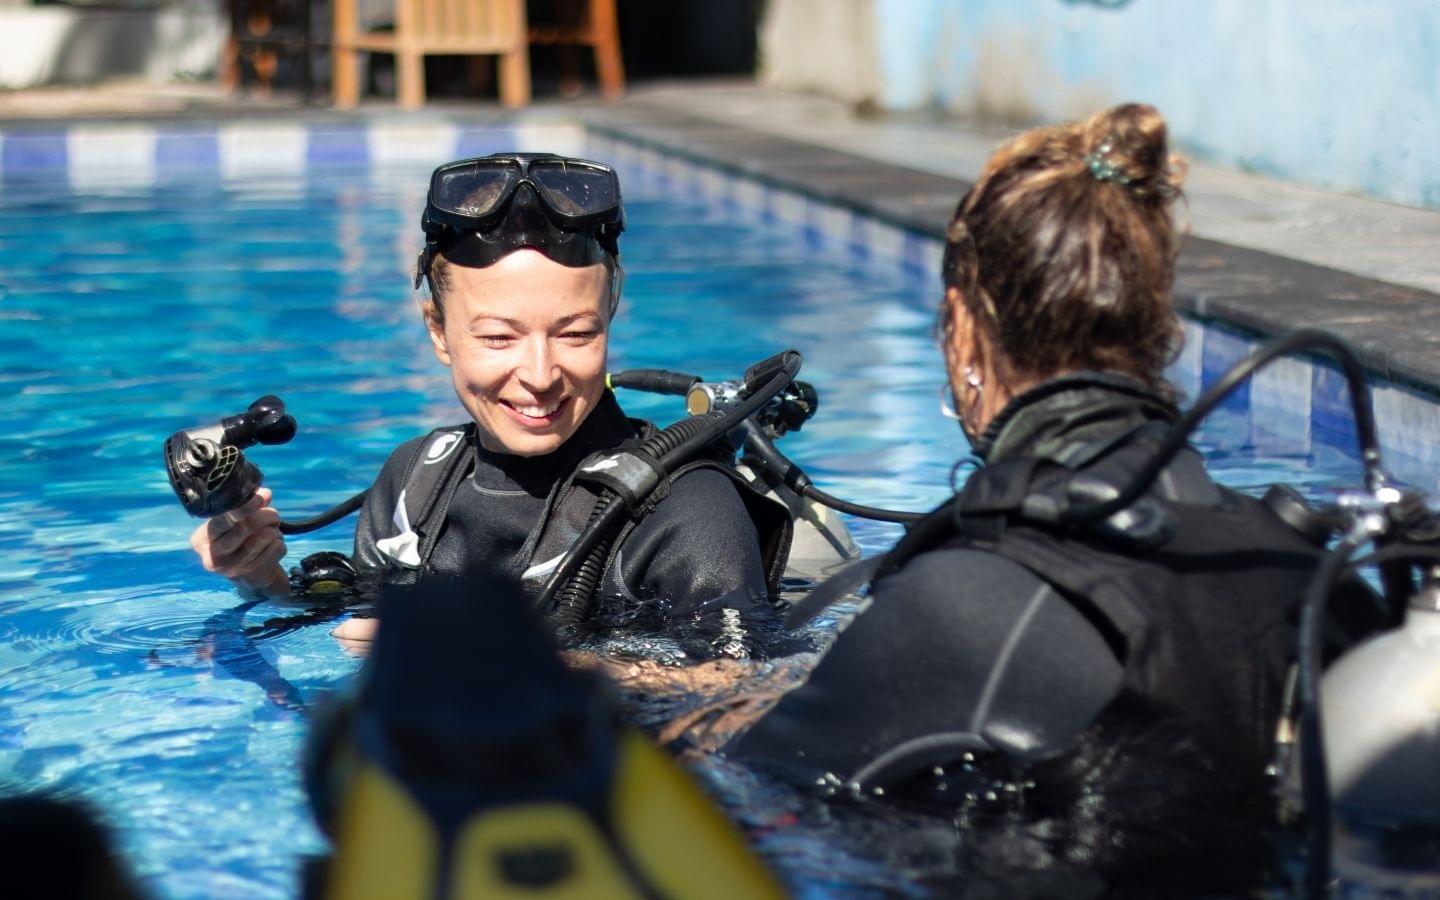 Complete guide to become a Scuba Diving Instructor